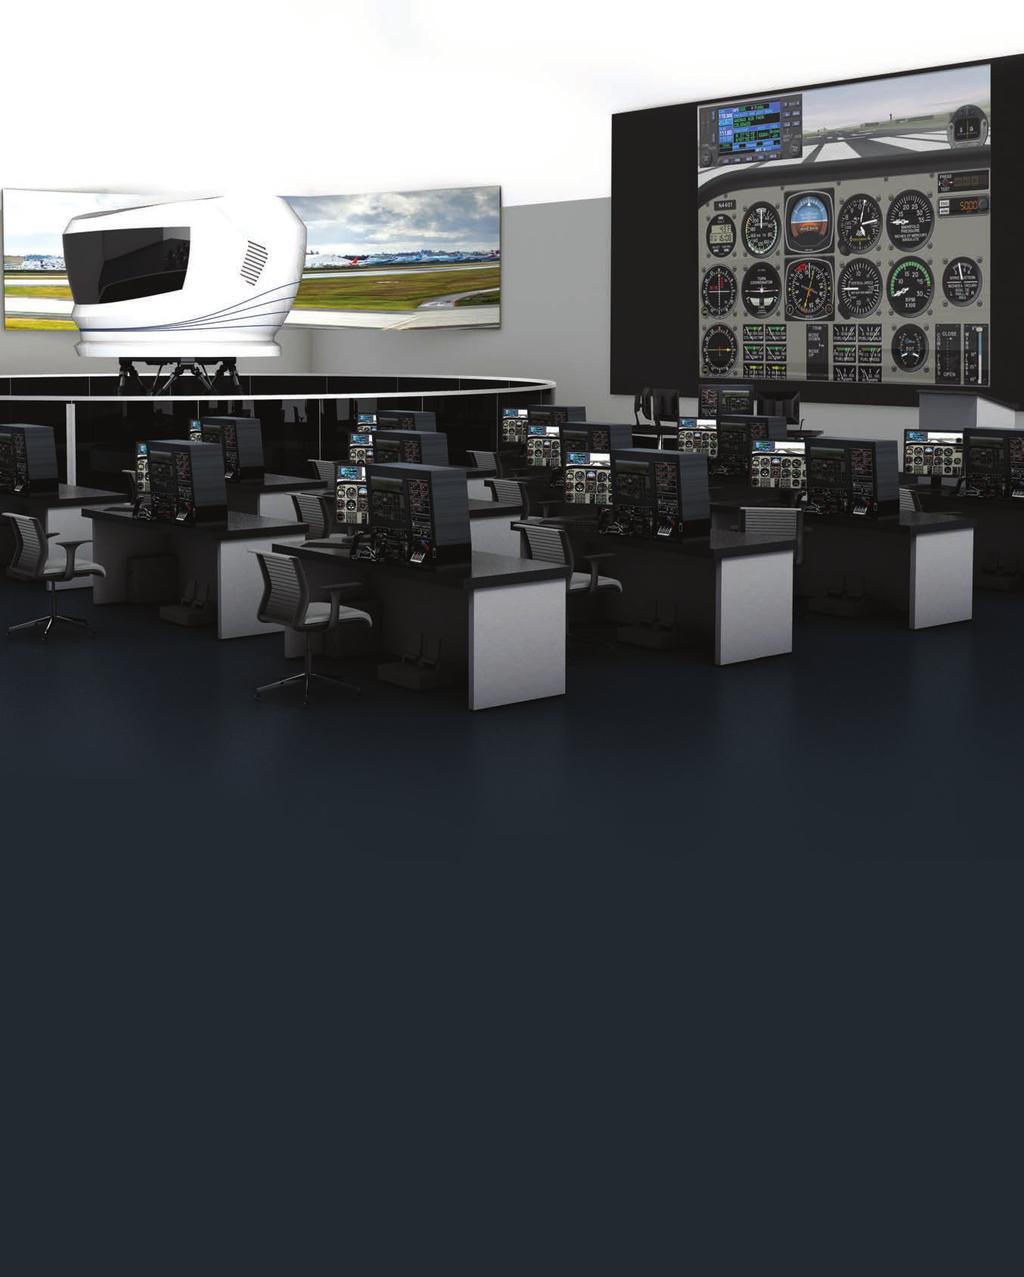 ADDITIONAL SYSTEMS INTEGRATED LOGISTICS SUPPORT (ILS) This group provides onsite operation, maintenance and service of flight simulators and training systems made by ETC or other